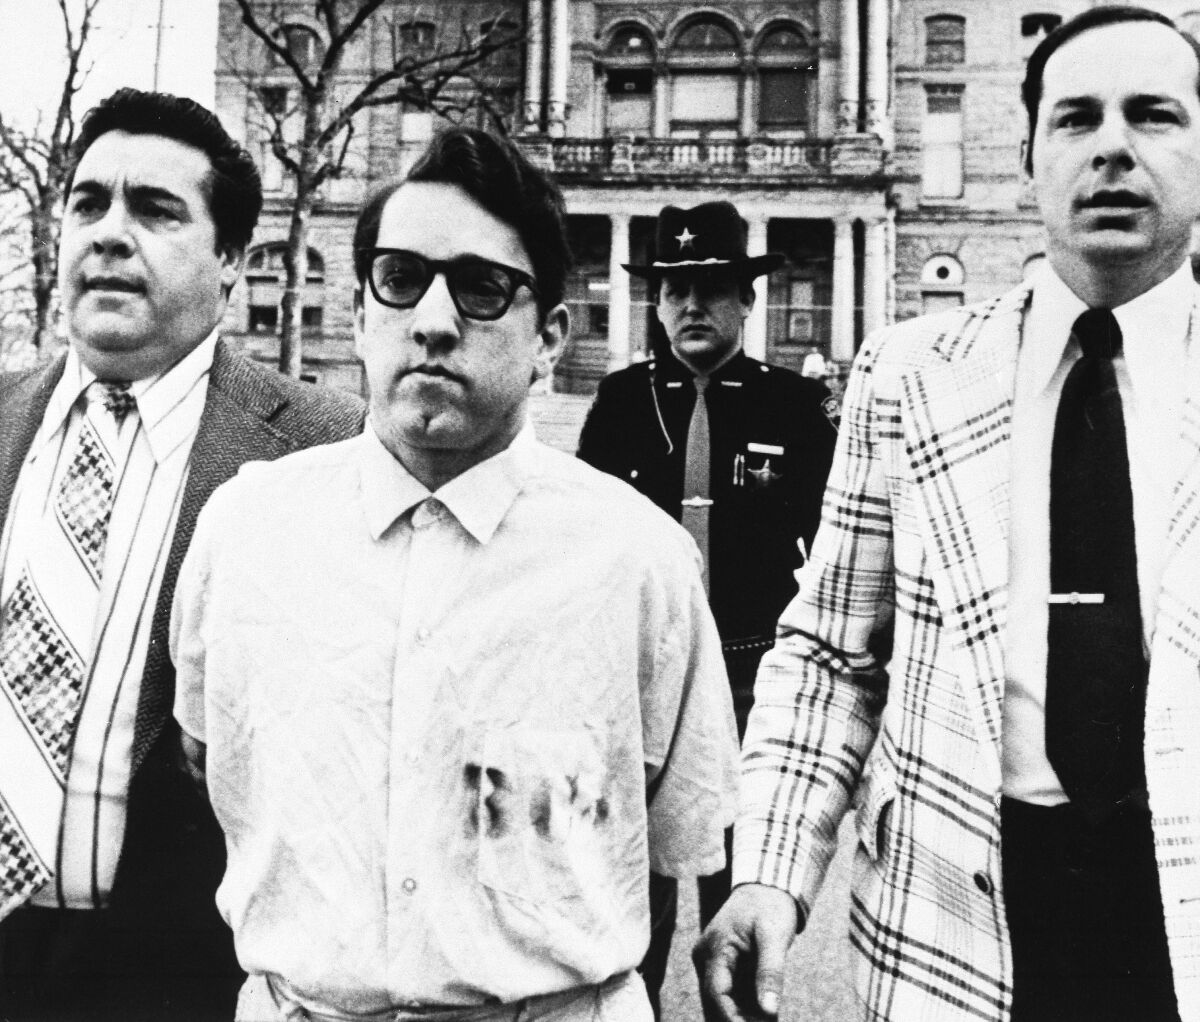 FILE - Mass murderer James Ruppert, center, is taken back to jail after his arraignment in Hamilton, Ohio, on eleven counts of aggravated murder, April 8, 1975. Ruppert, 88, who was serving a life sentence for the shooting deaths of 11 family members — including eight children — died Saturday, June 4, 2022, at the prison system’s Franklin Medical Center in Columbus. (AP Photo/Brian Horton, File)